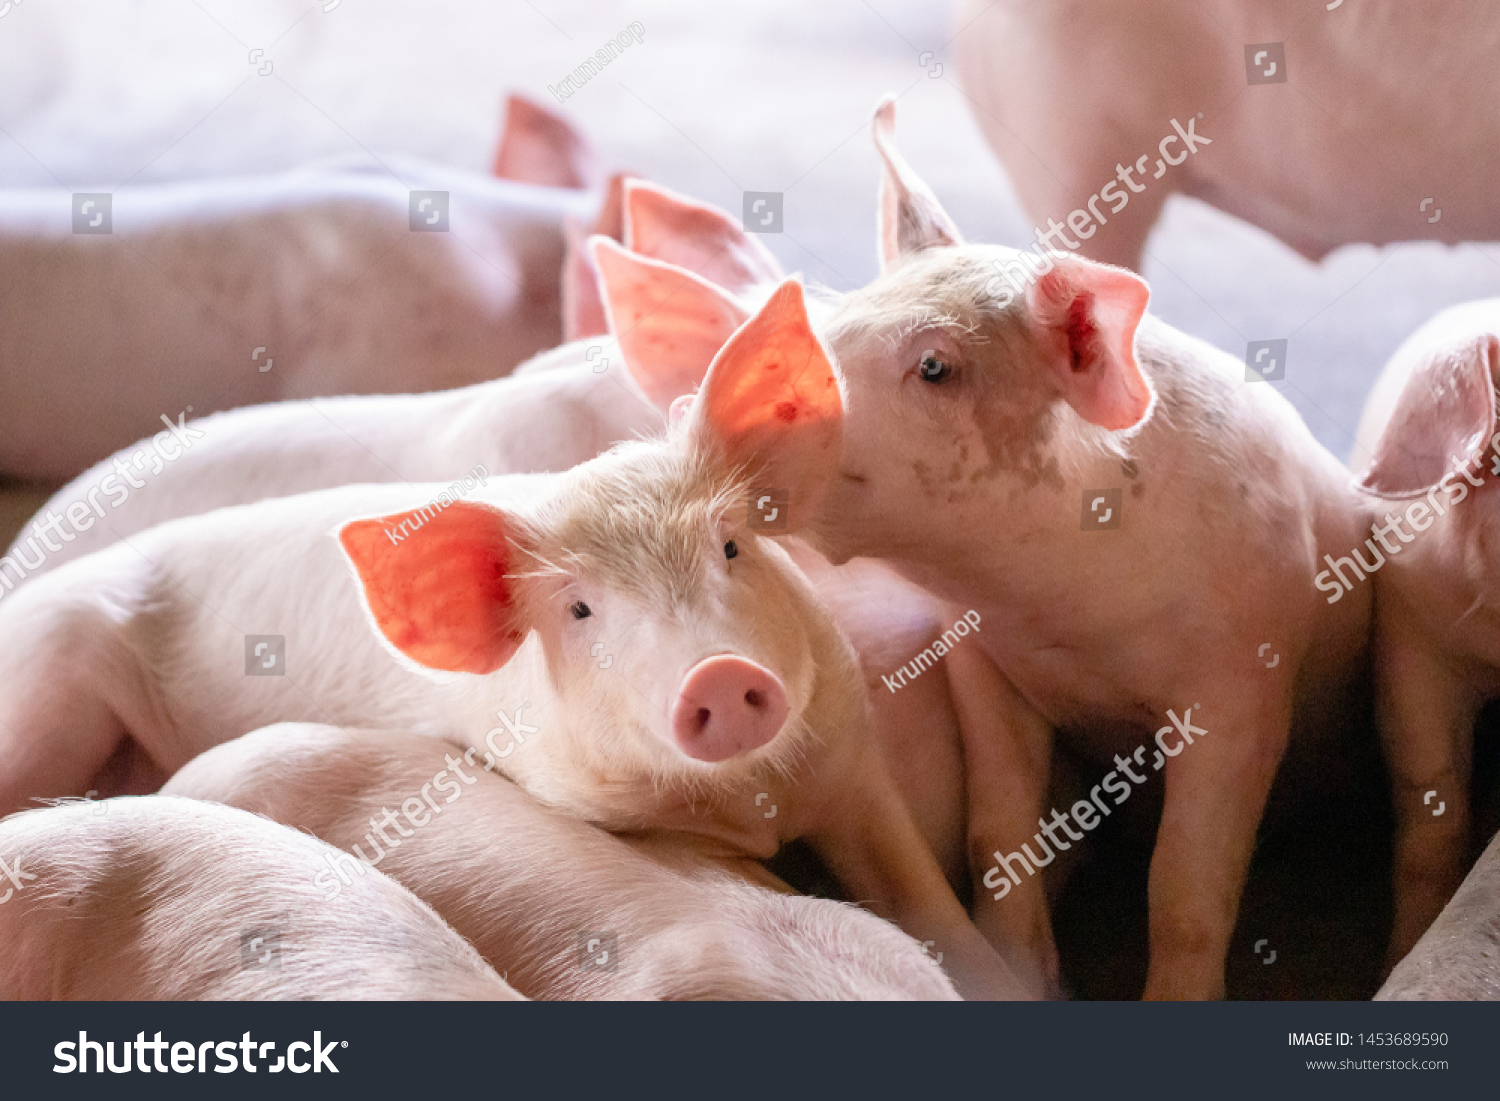 A small piglet in the farm. group of mammal waiting feed. swine in the stall. Popular animals raised around the world for meat consumption and business trading. (Sus scrofa domesticus) #1453689590